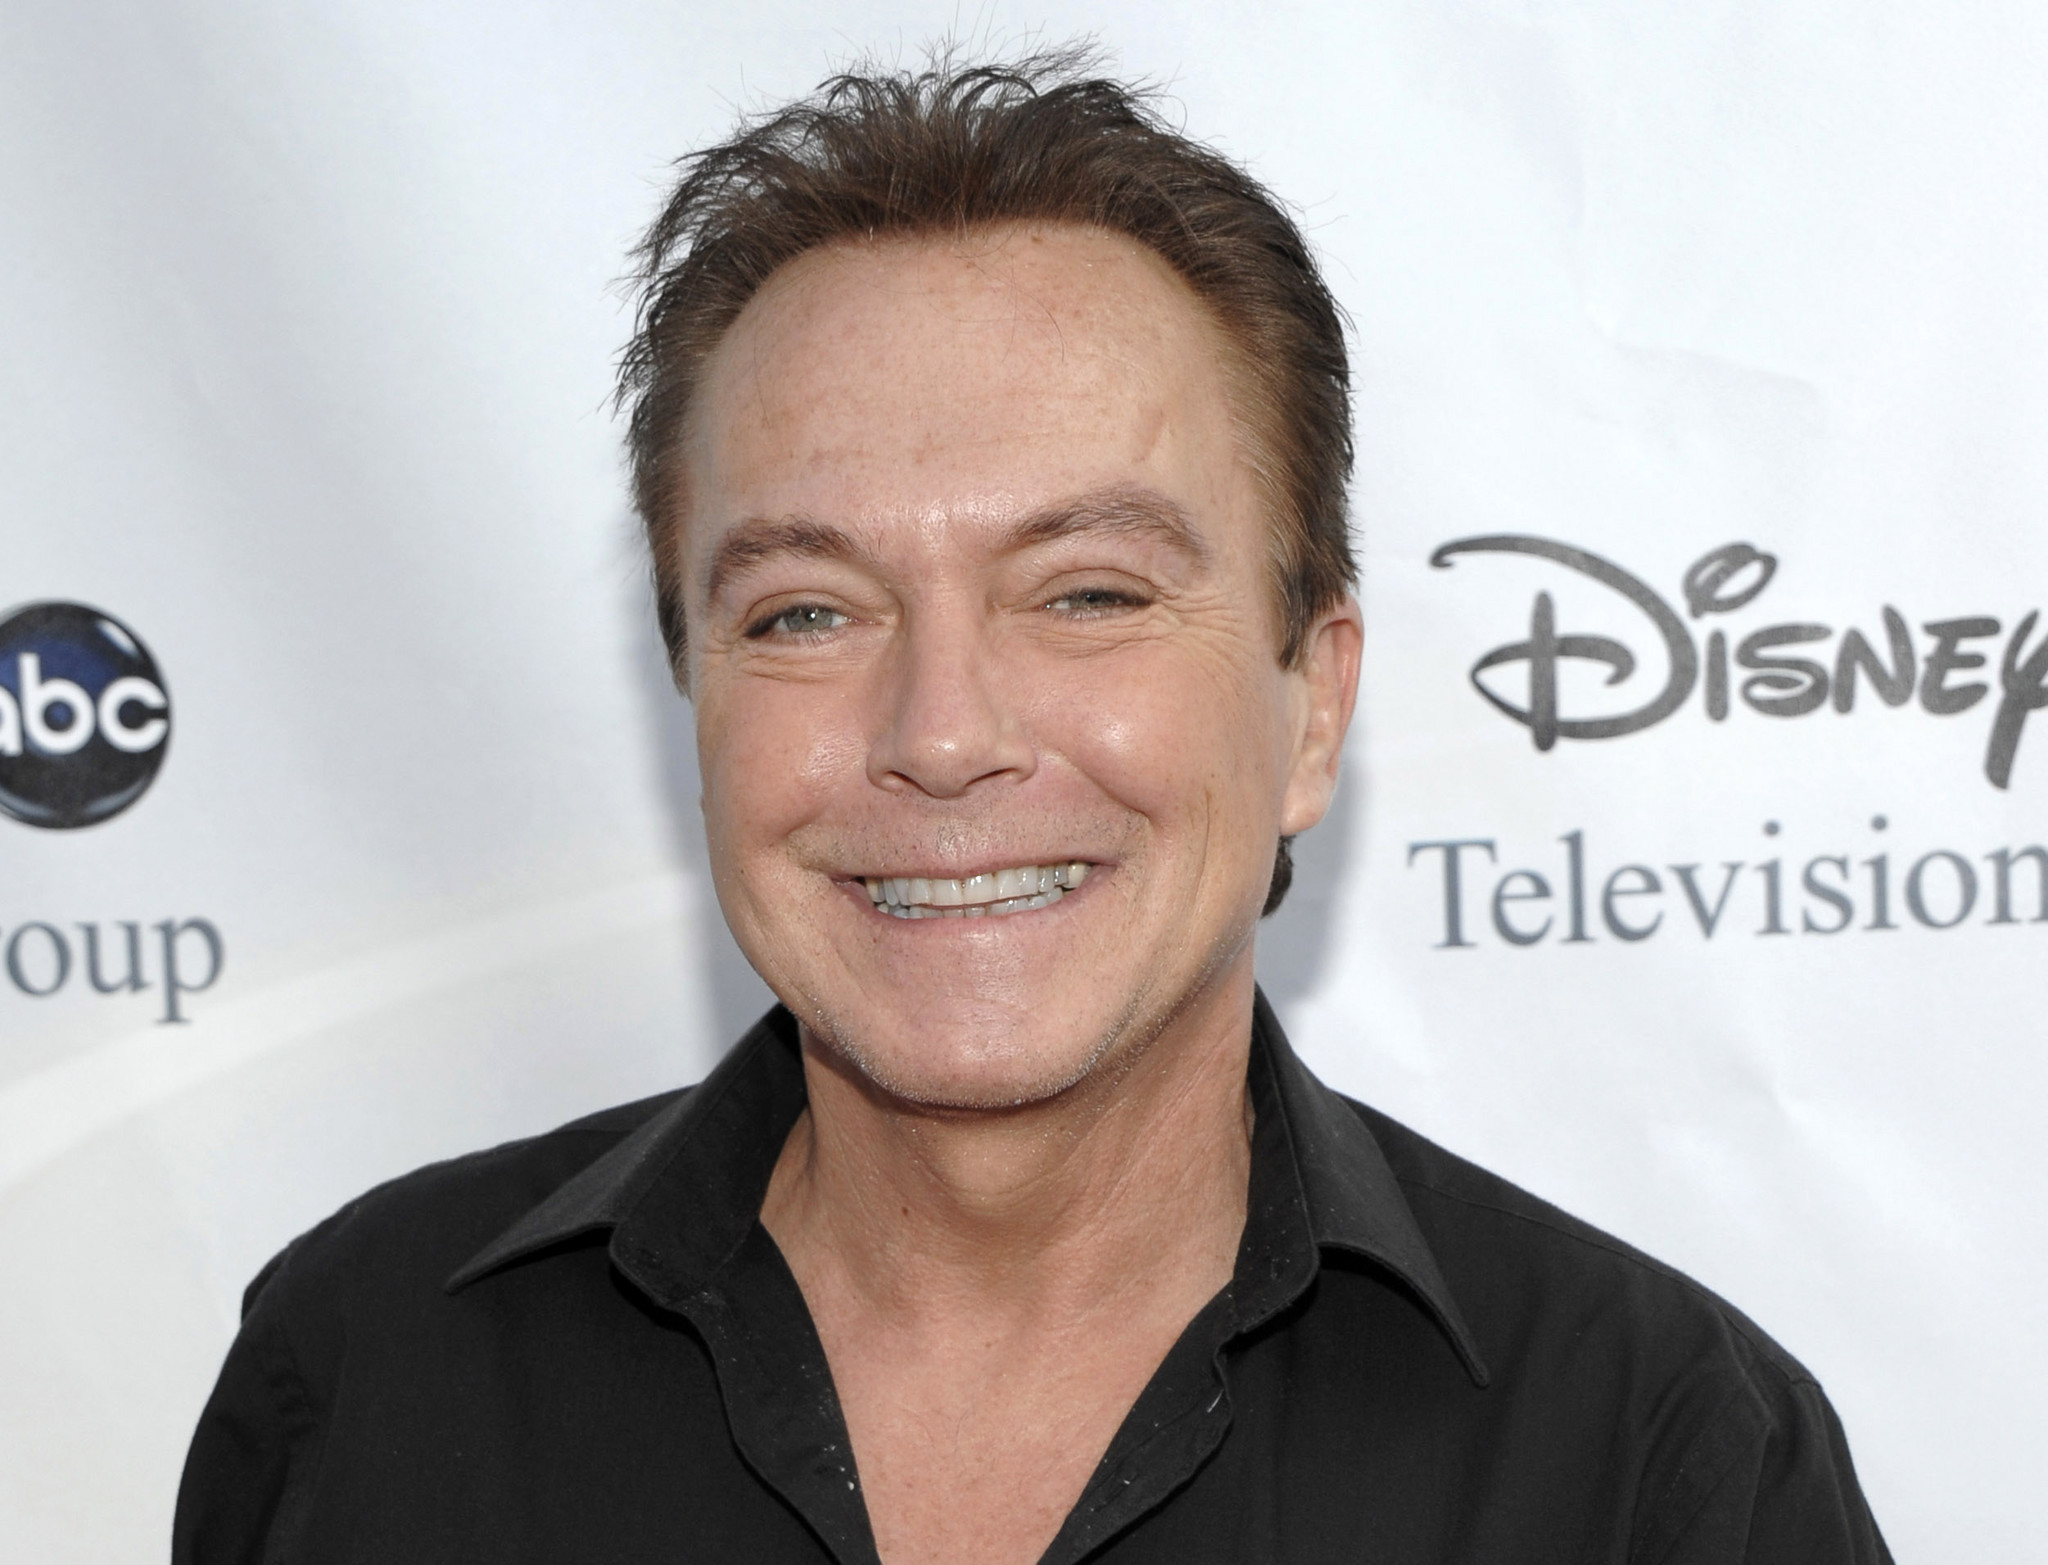 David Cassidy, heartthrob star of 'The Partridge Family,' reveals he has dementia